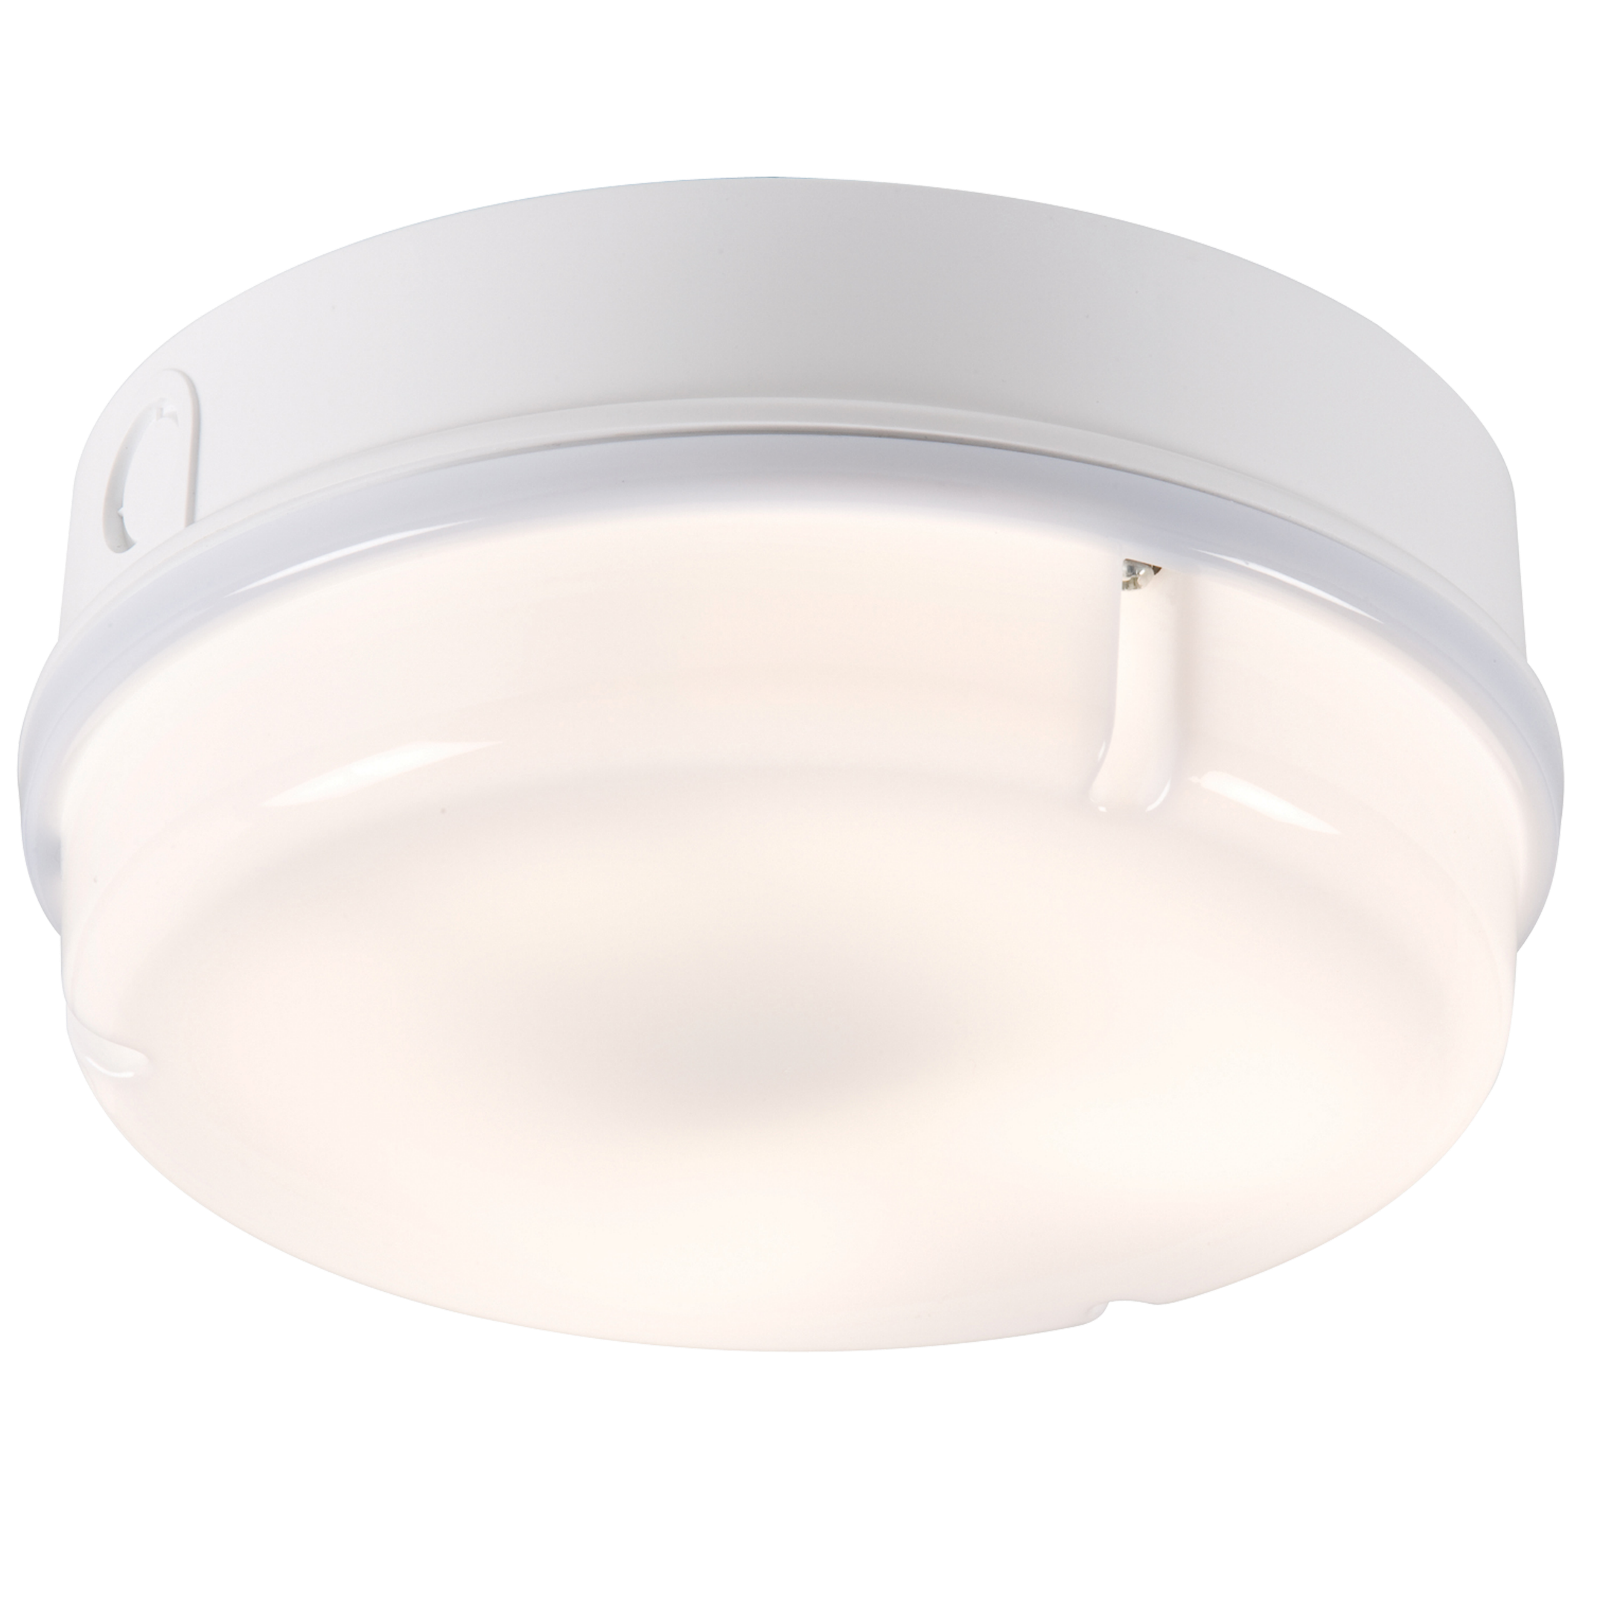 ML Accessories-TPR16WOHF IP65 16W HF Round Bulkhead with Opal Diffuser and White Base